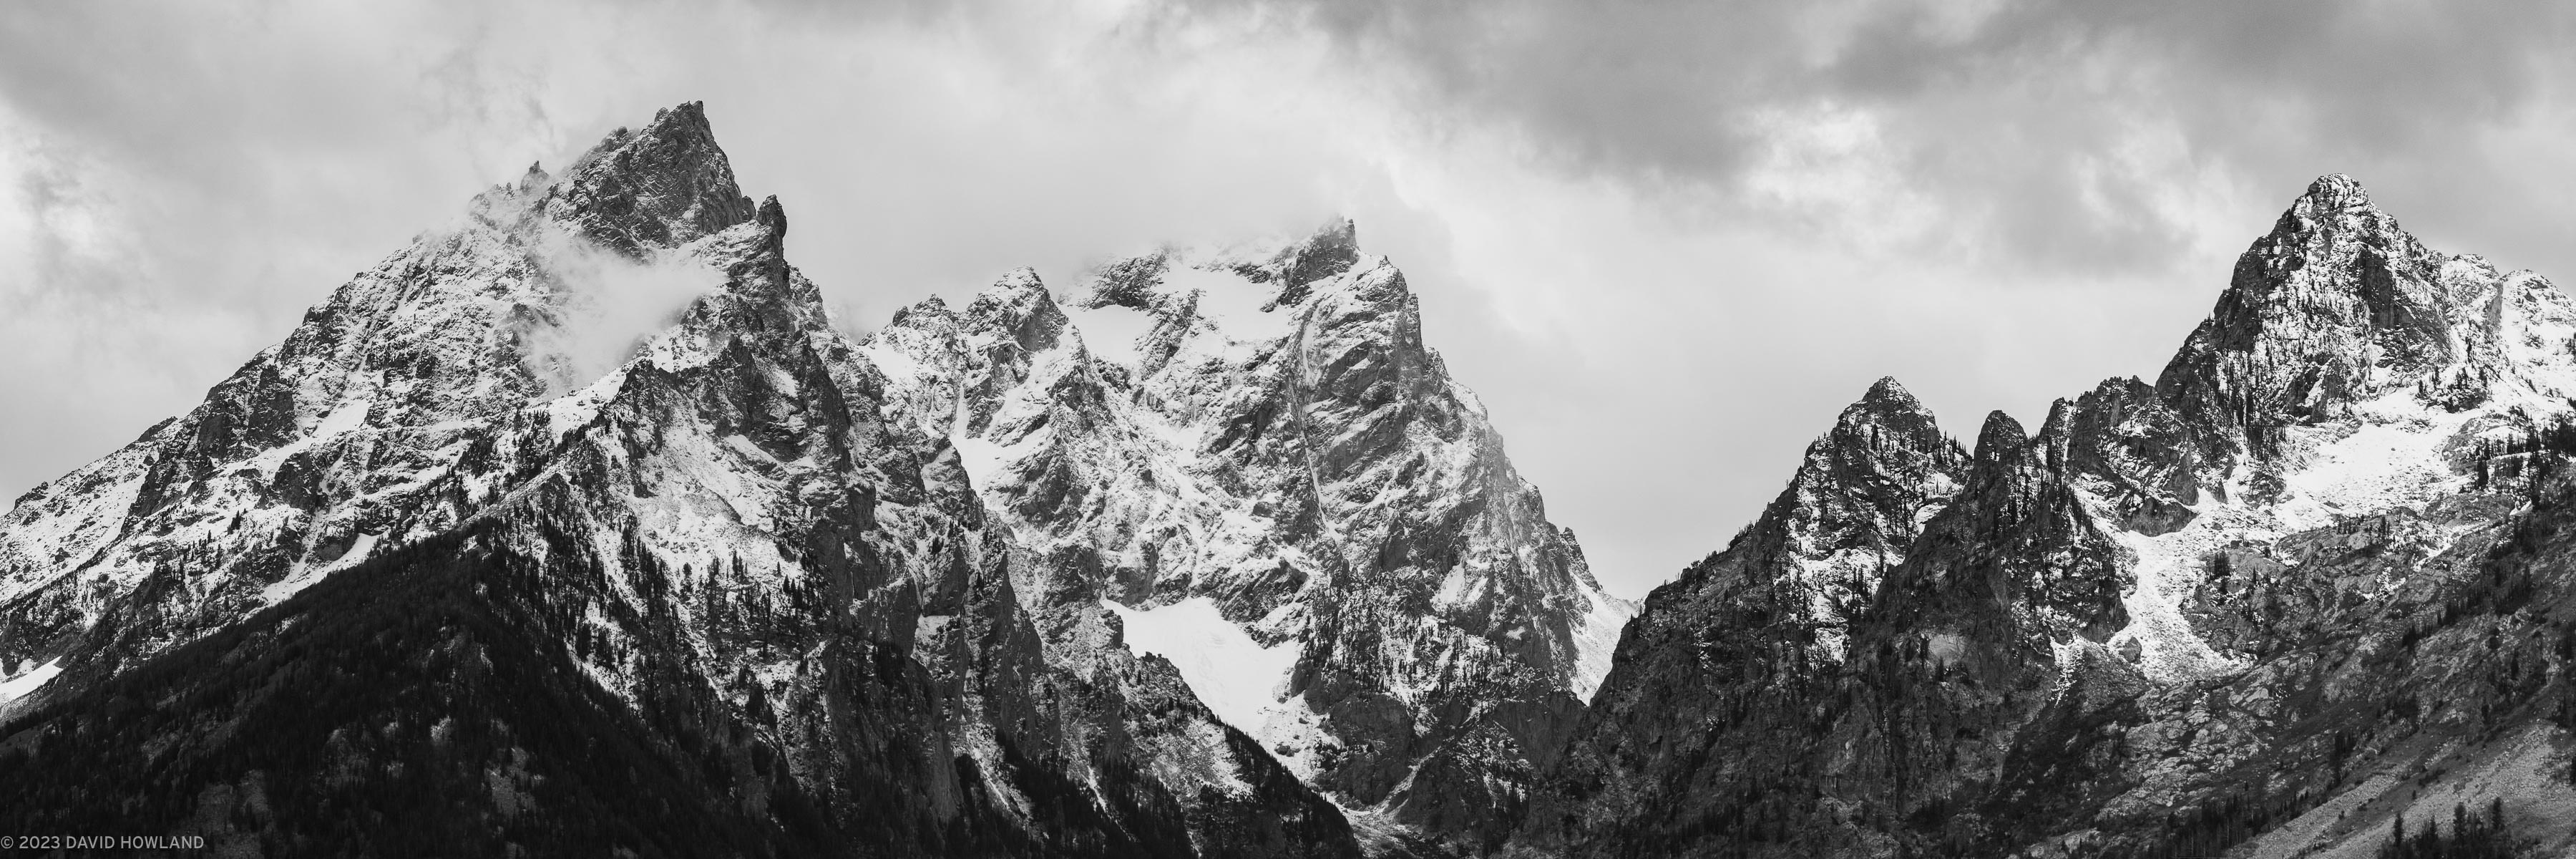 A black and white photo of storm clouds gathering over the snowy high peaks of the Teton Range in Grand Teton National Park, WY.